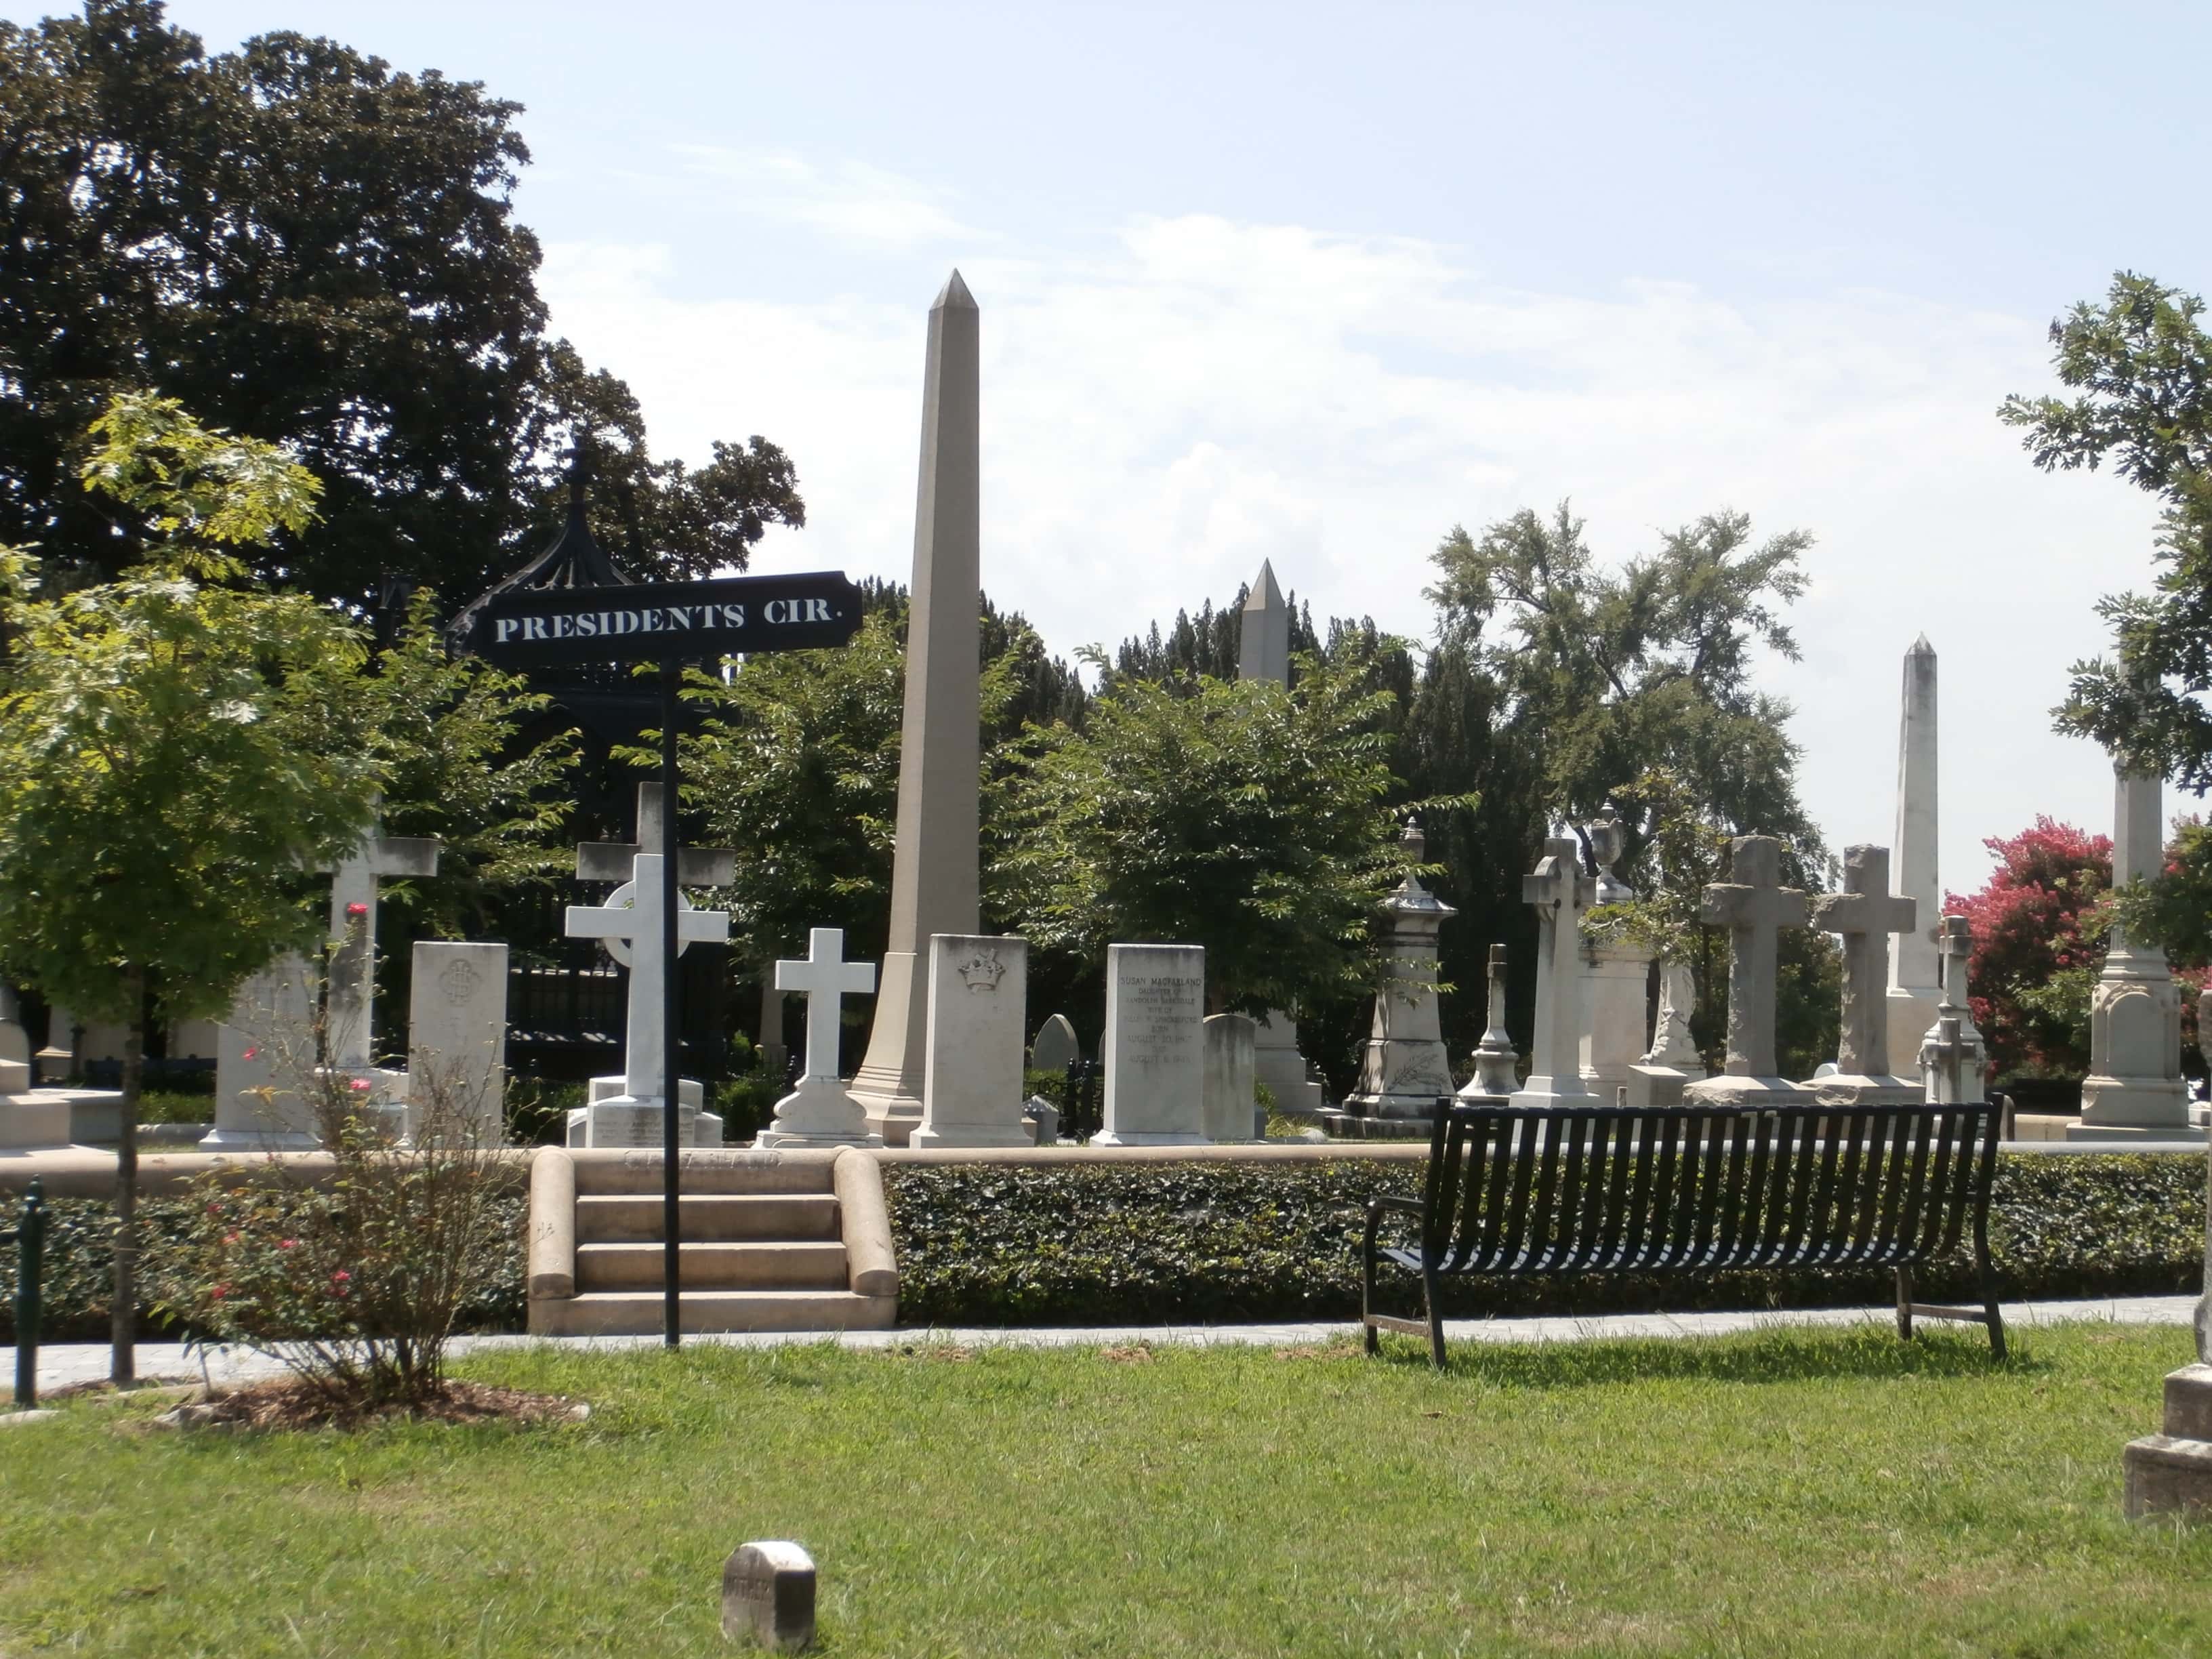 Presidents Circle at the Hollywood Cemetery in Richmond, Virginia. Graves of John Tyler and James Monroe.